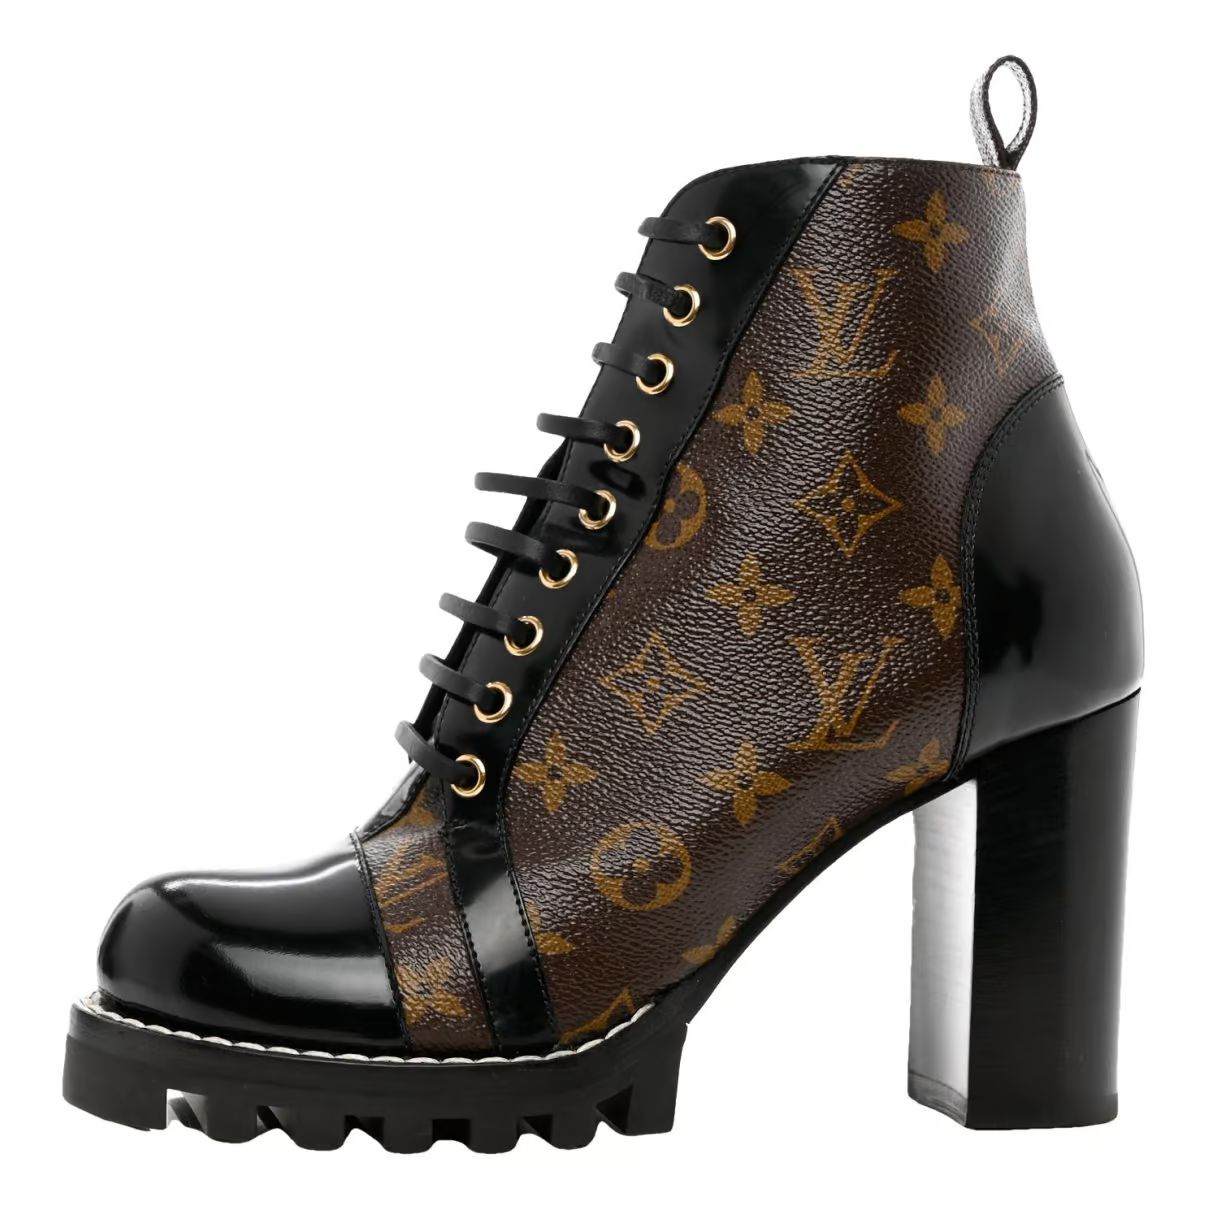 Star trail leather lace up boots Louis Vuitton Black size 38.5 EU in Leather - 37558930 | Vestiaire Collective (Global)